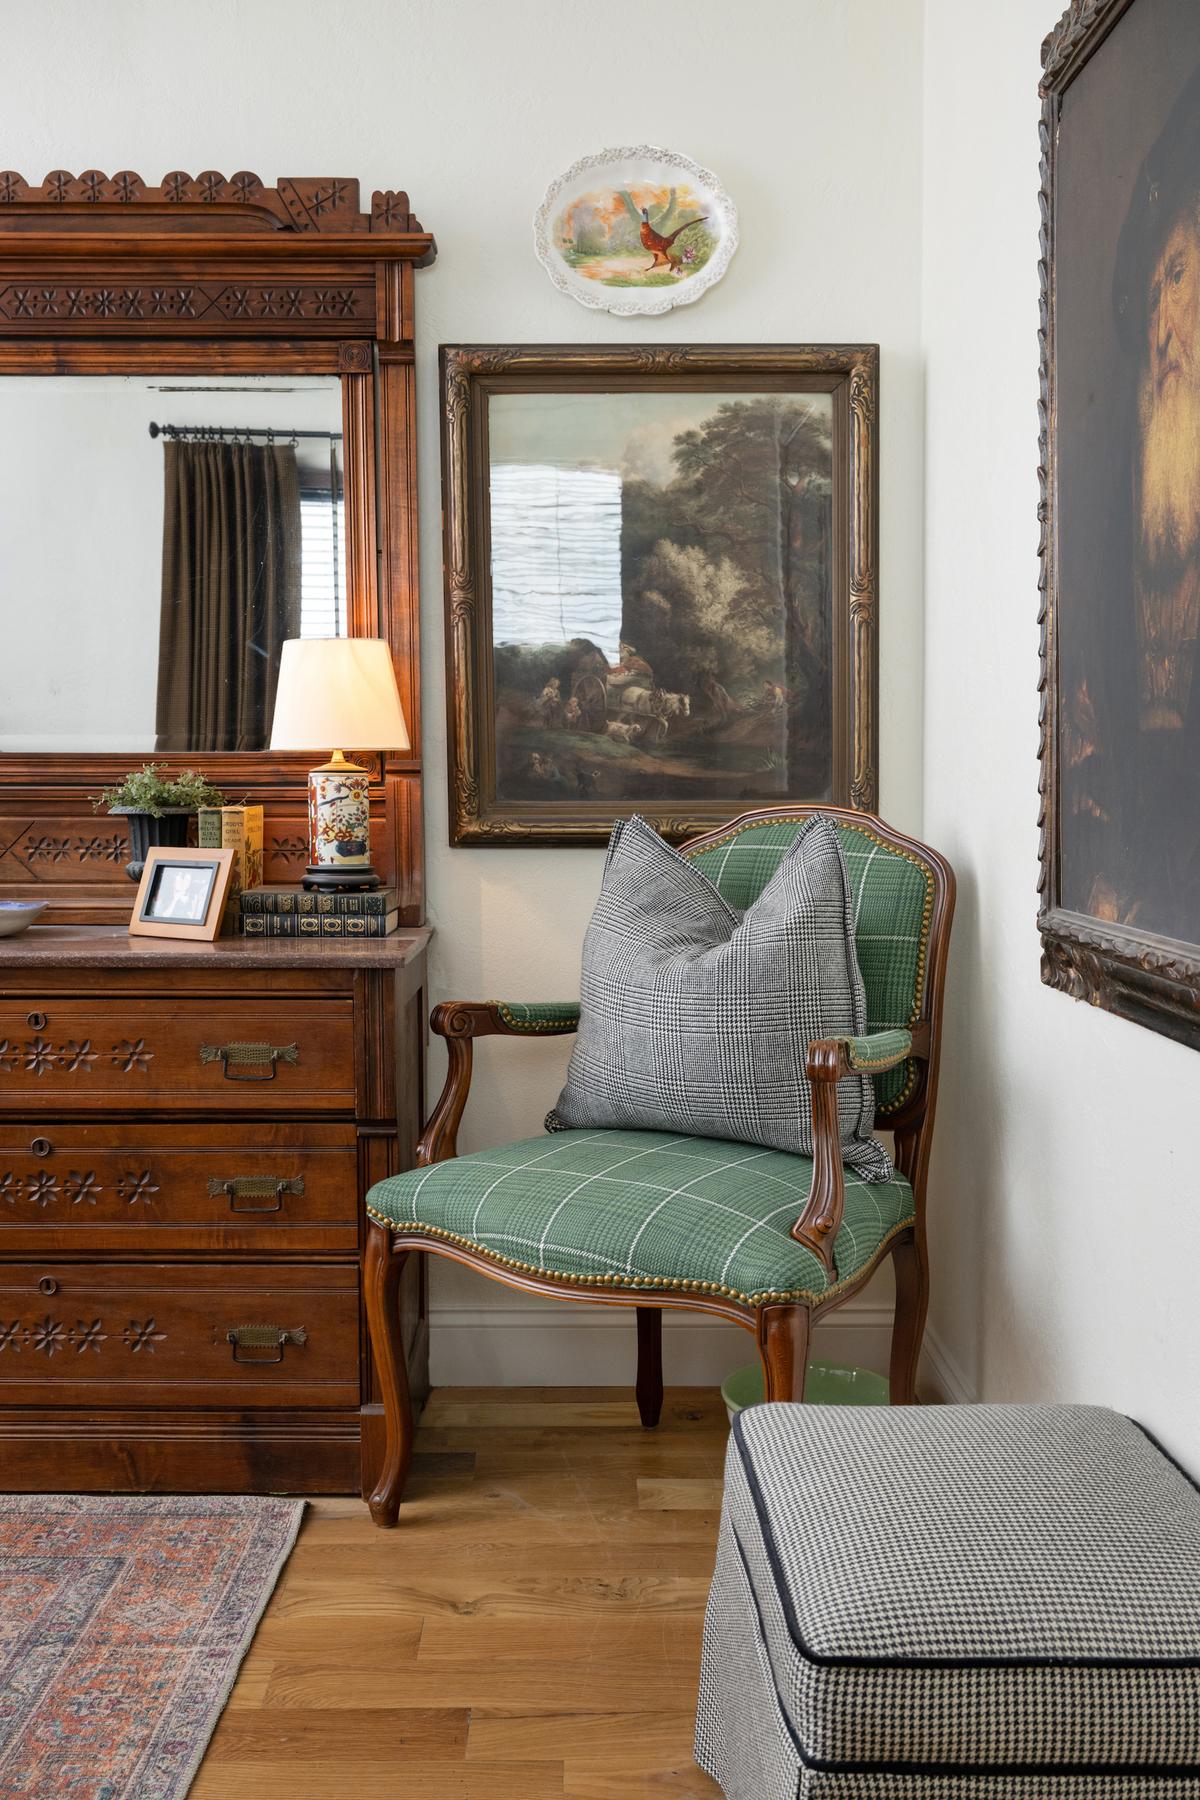 The focal point of the lodge-inspired guest bedroom is the green chair, which Carlie recently had reupholstered with a stunning green Thibaut houndstooth fabric, breathing new life into this cherished chair. (Handout/TNS)